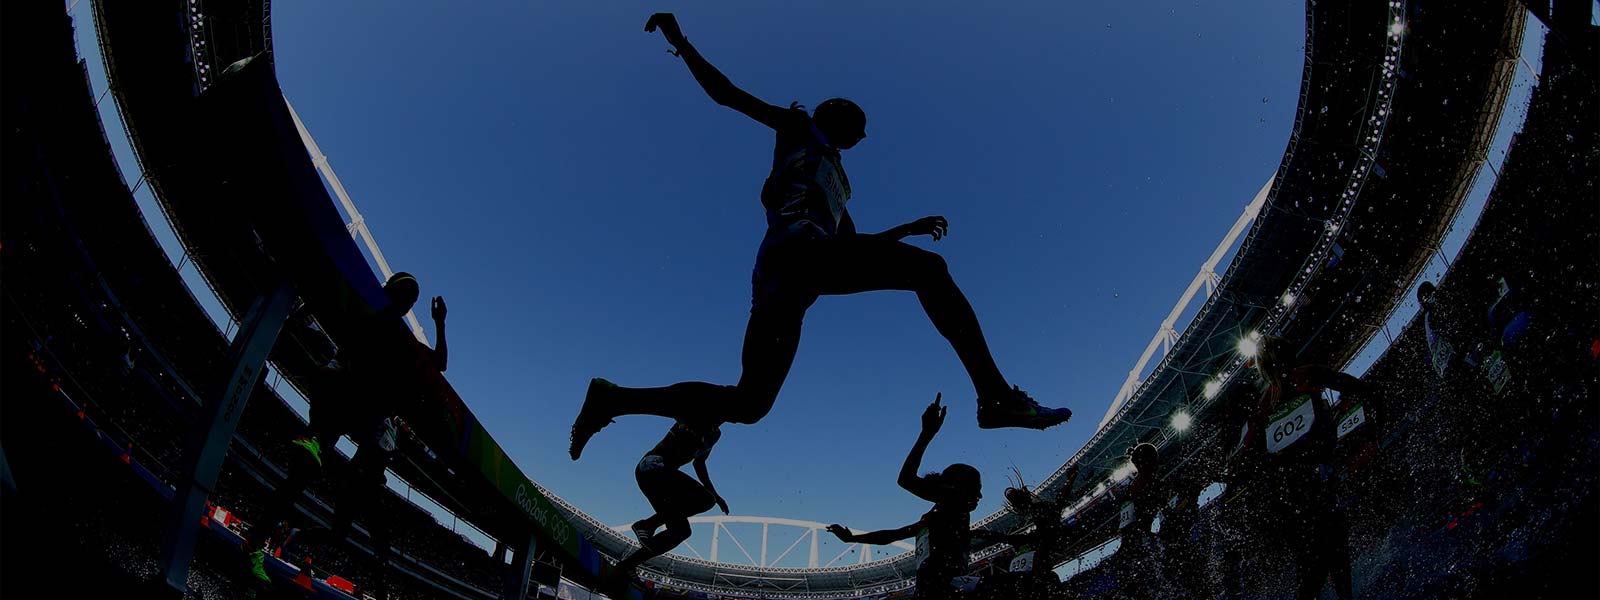 Silhouette of athletes leaping into the air inside an Olympic stadium